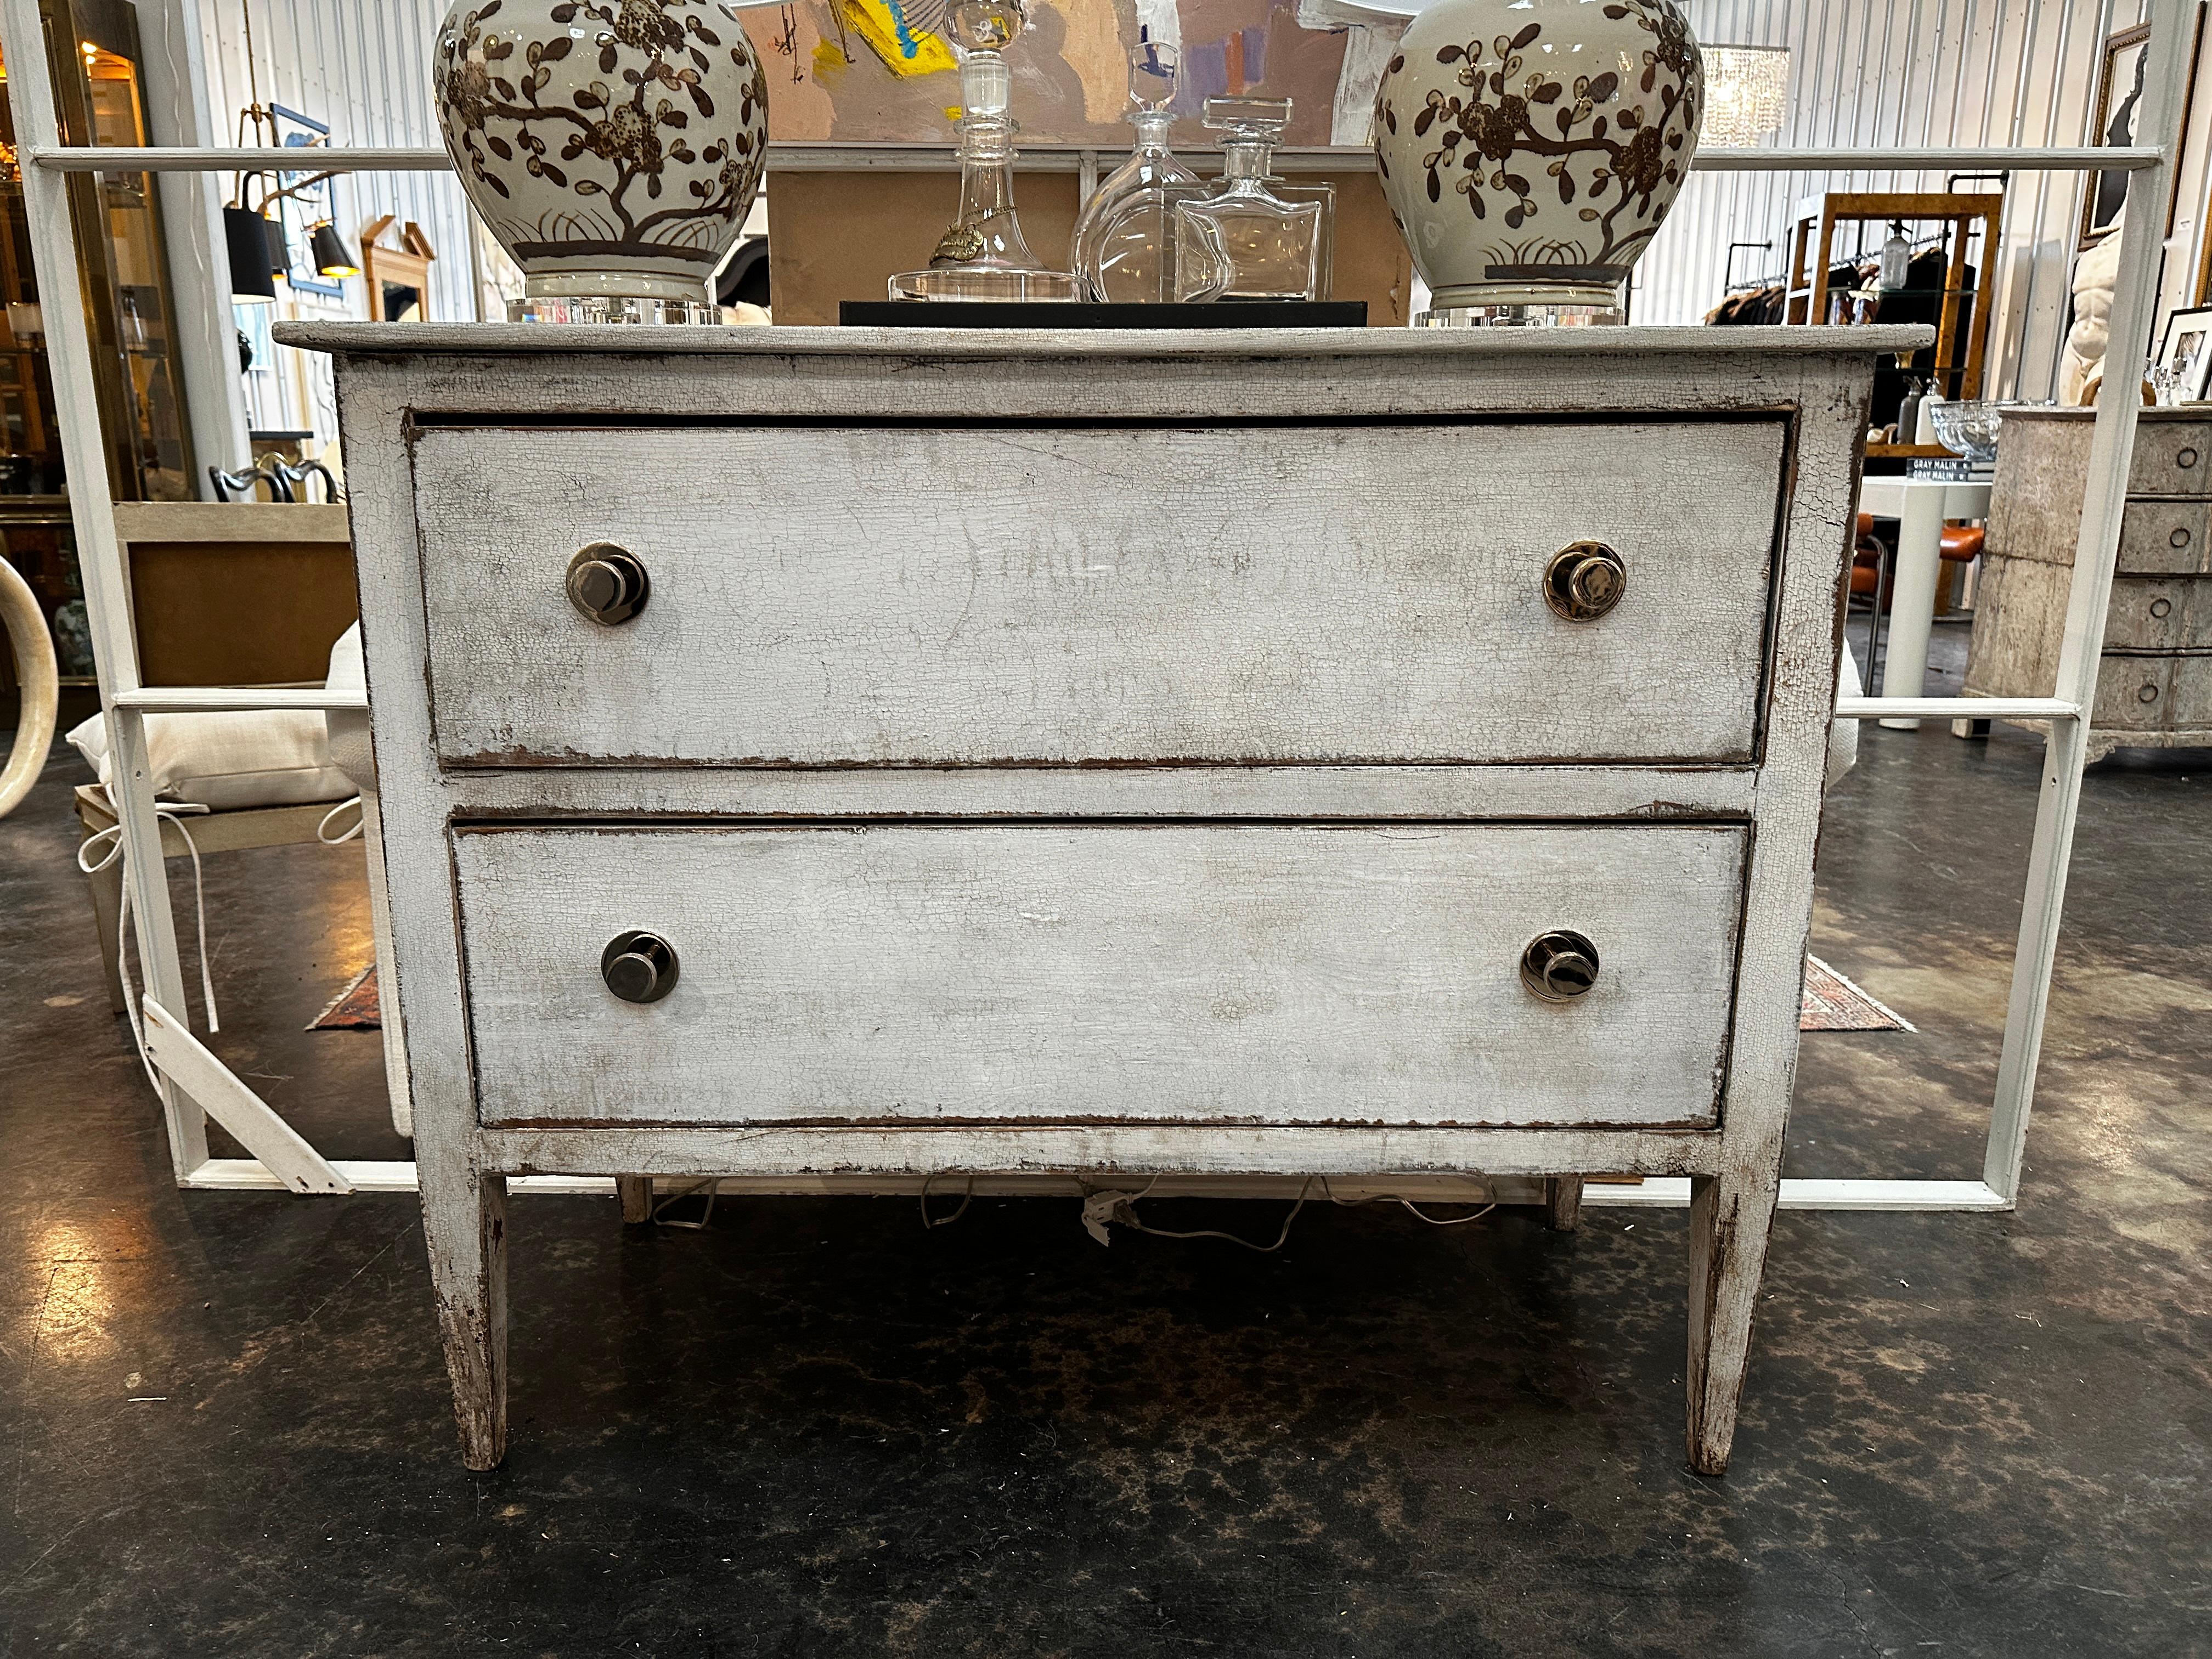 Antique Italian painted chest from early 1900s.  The hardware has been updated with large knurled nickel knobs.   The piece sits on tapered legs, typical of that period of time. The finish is possibly not original (not sure) but is still old.